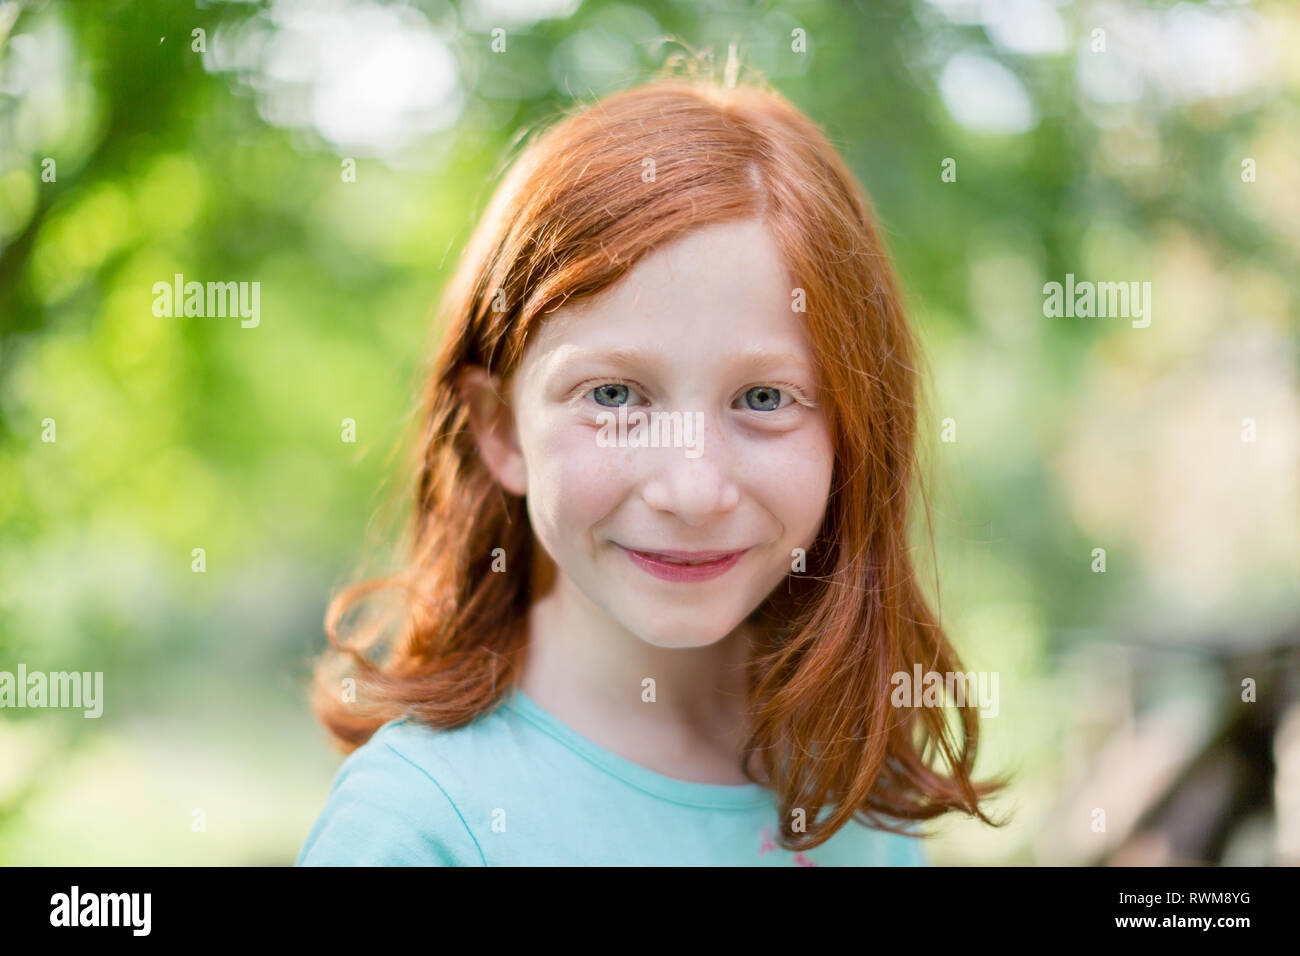 Red haired girl in garden, head and shoulder portrait Stock Photo